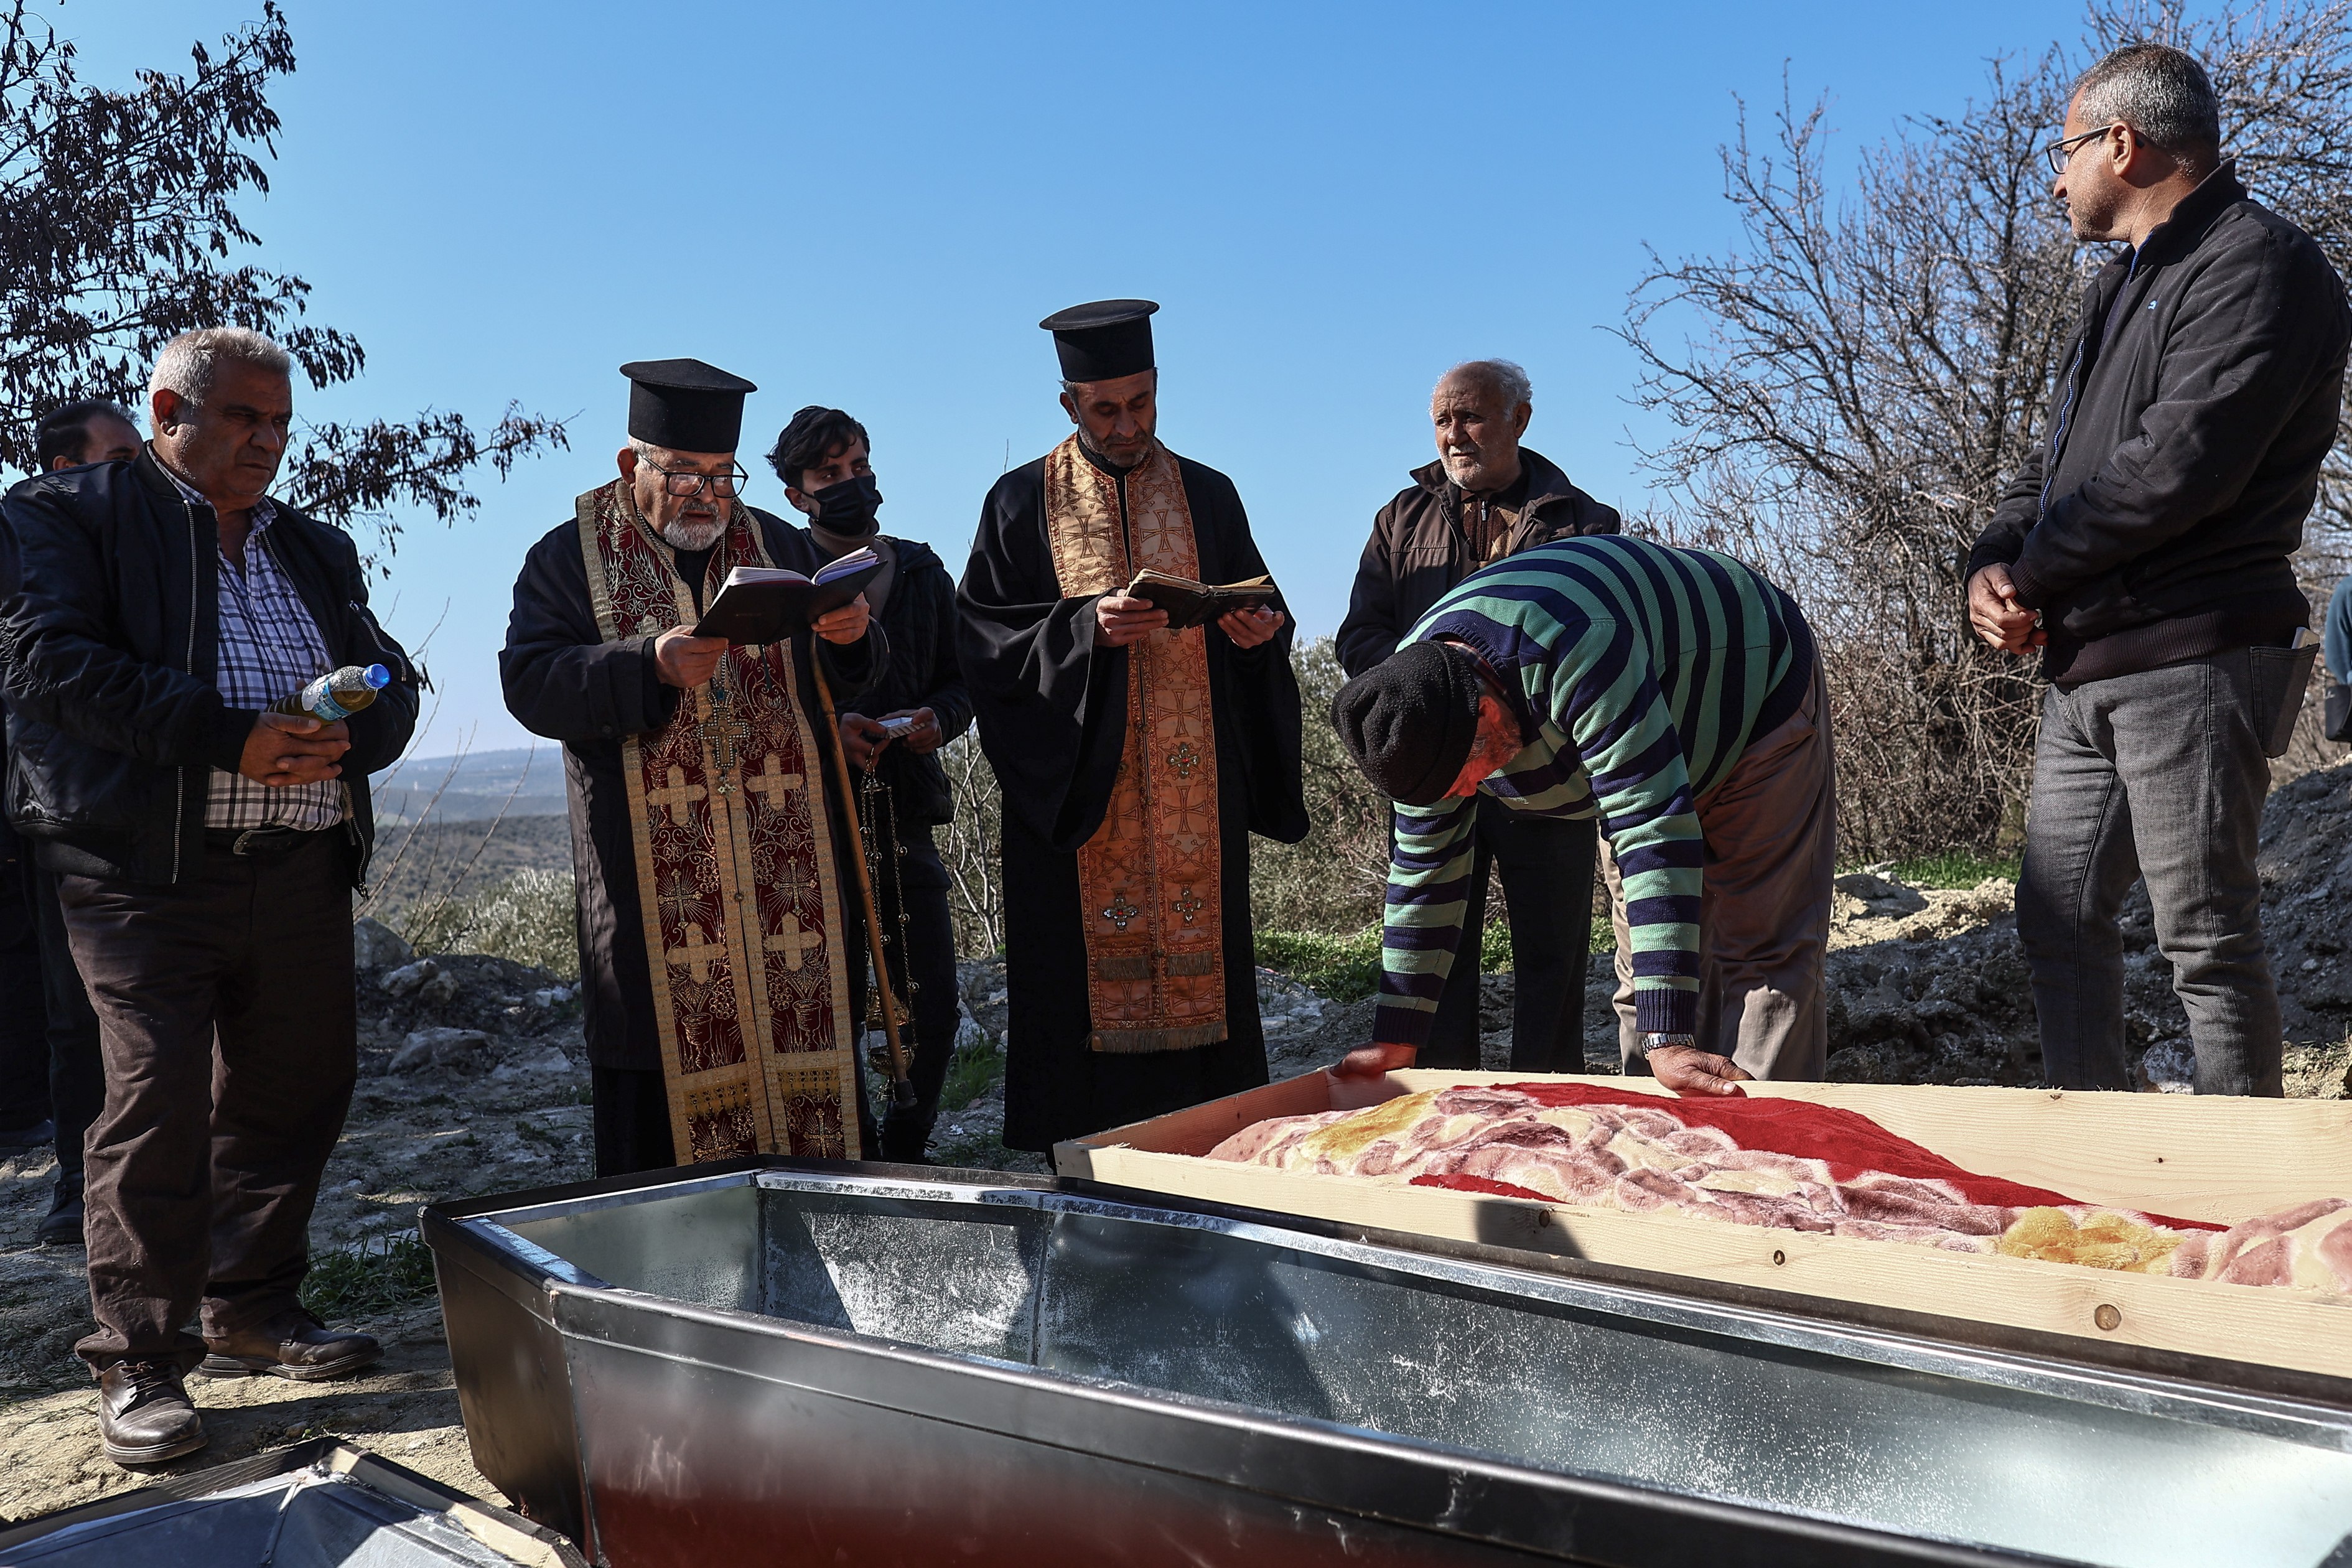 Mourners attend the funeral of a relative who died after the powerful earthquake on February 6, at Tokacli village near Hatay, Turkey on Friday. Photo: EPA-EFE